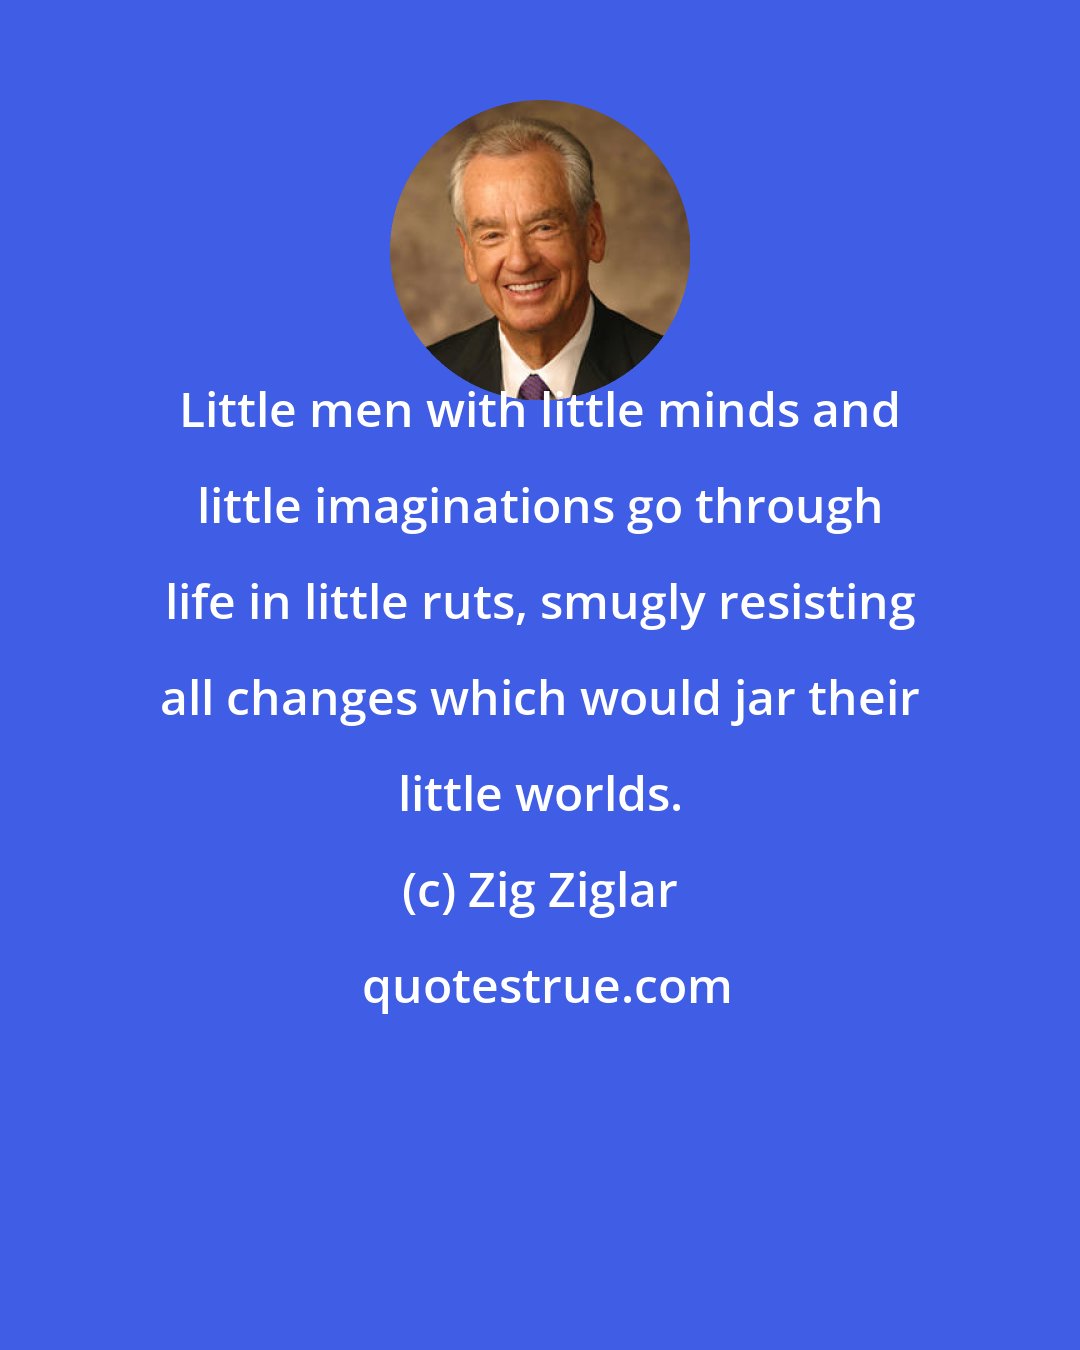 Zig Ziglar: Little men with little minds and little imaginations go through life in little ruts, smugly resisting all changes which would jar their little worlds.